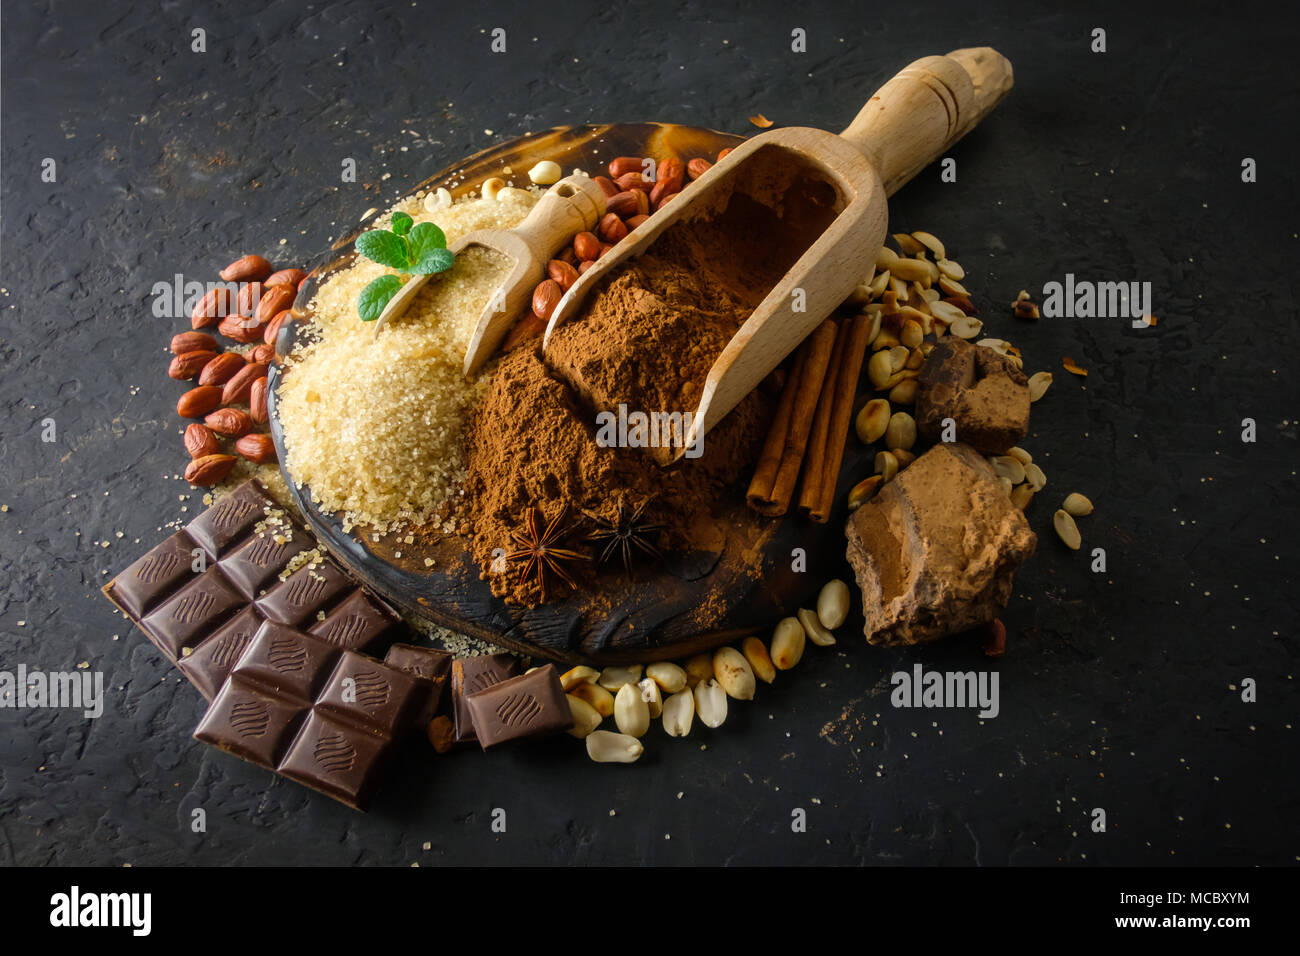 Cocoa powder, chocolate, nuts and spices Stock Photo